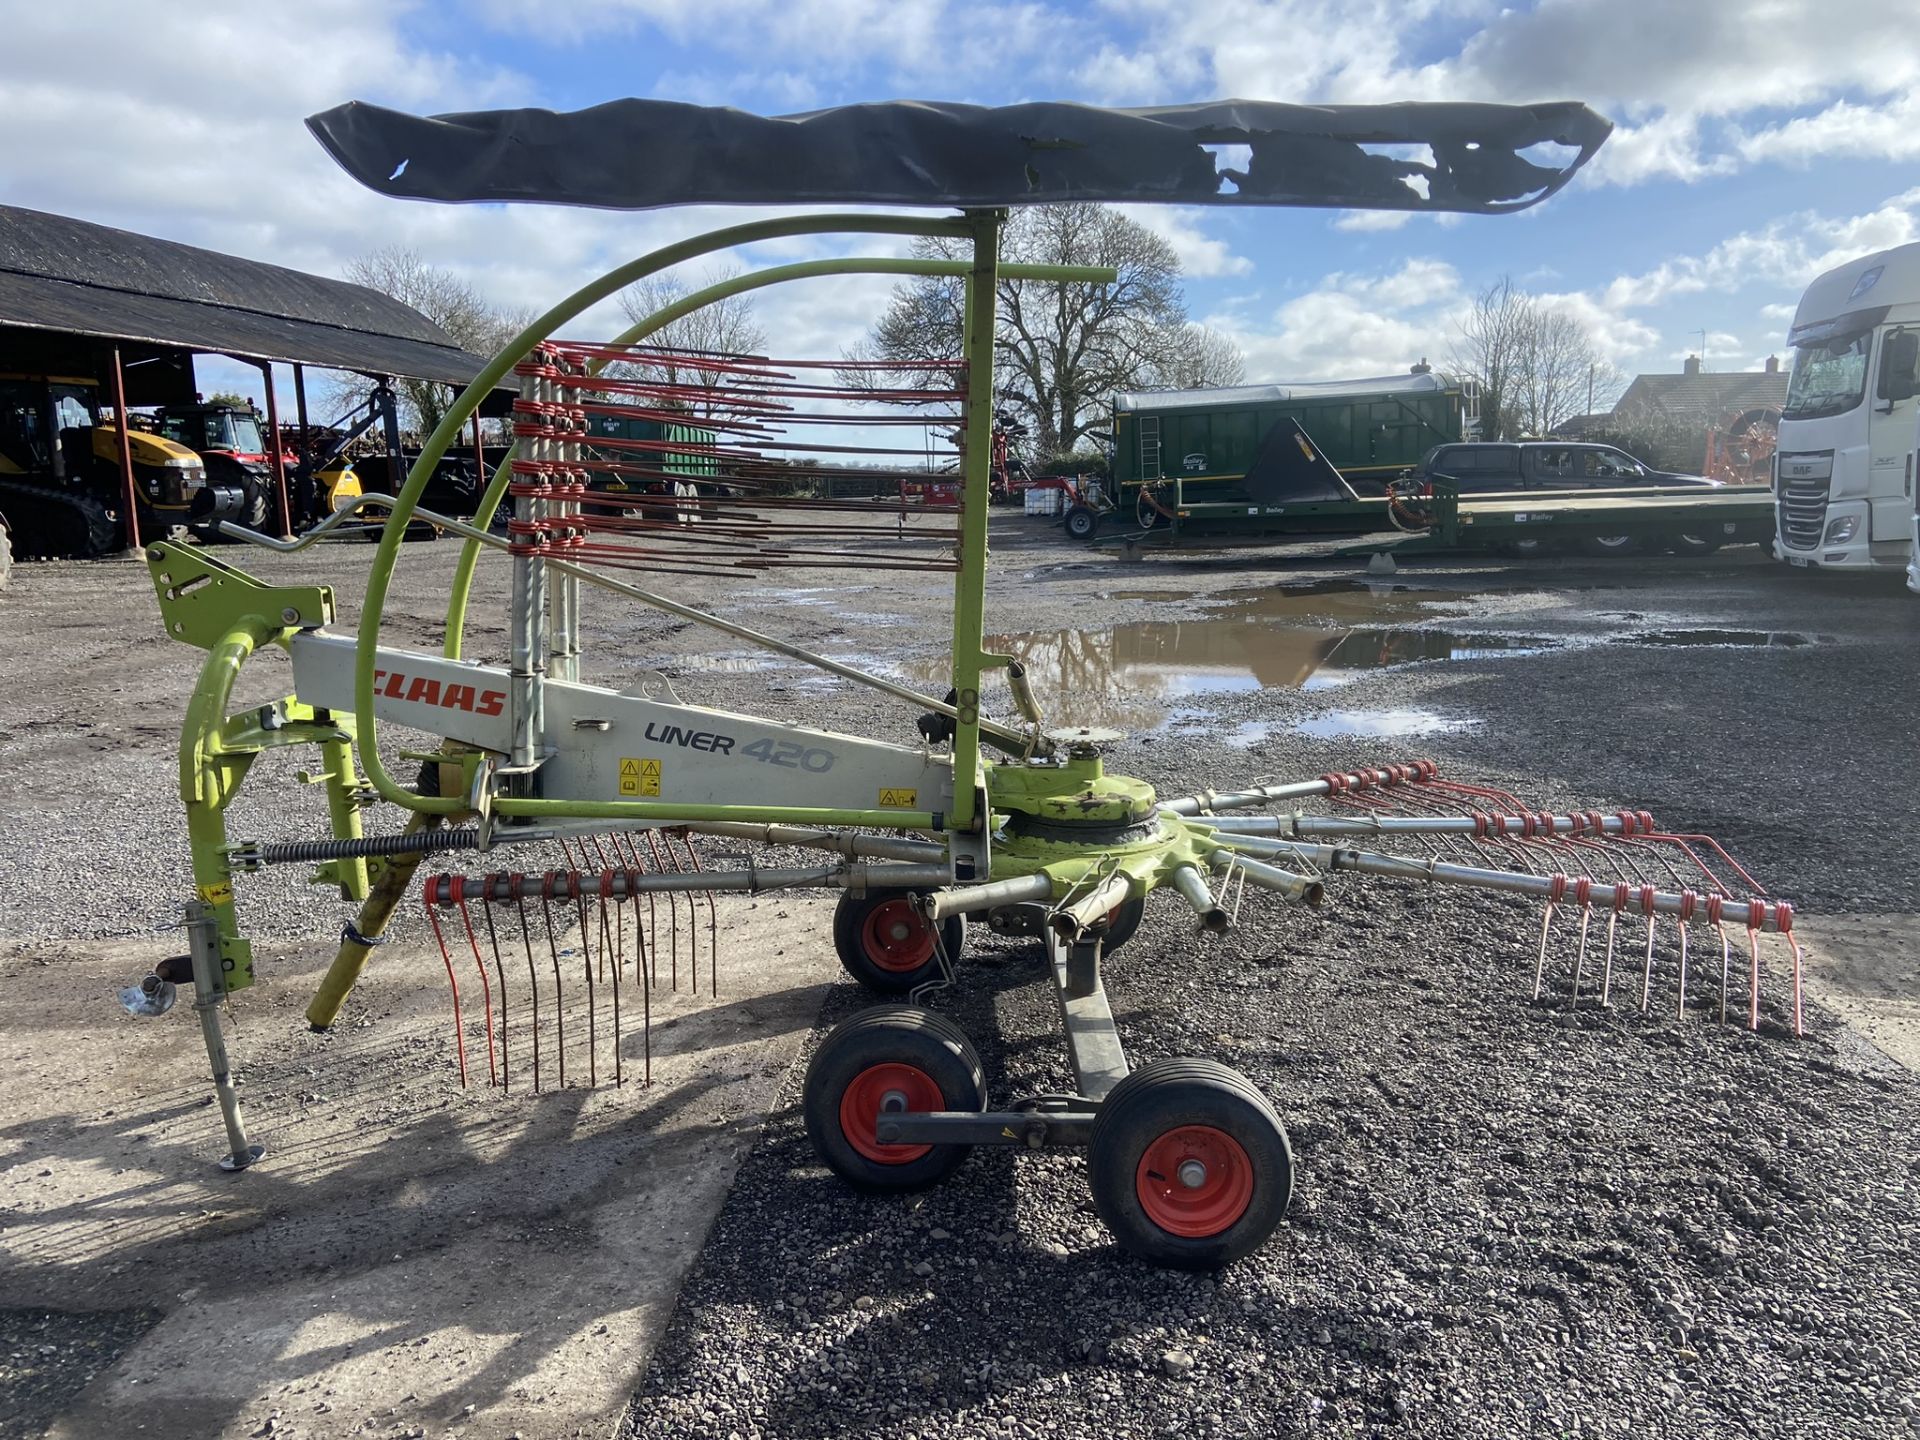 2013 Claas Liner 420 Type G11 Single Rotor Rake, S/No. G1102521, Mass Weight 650kg, 12 Tine Arms,